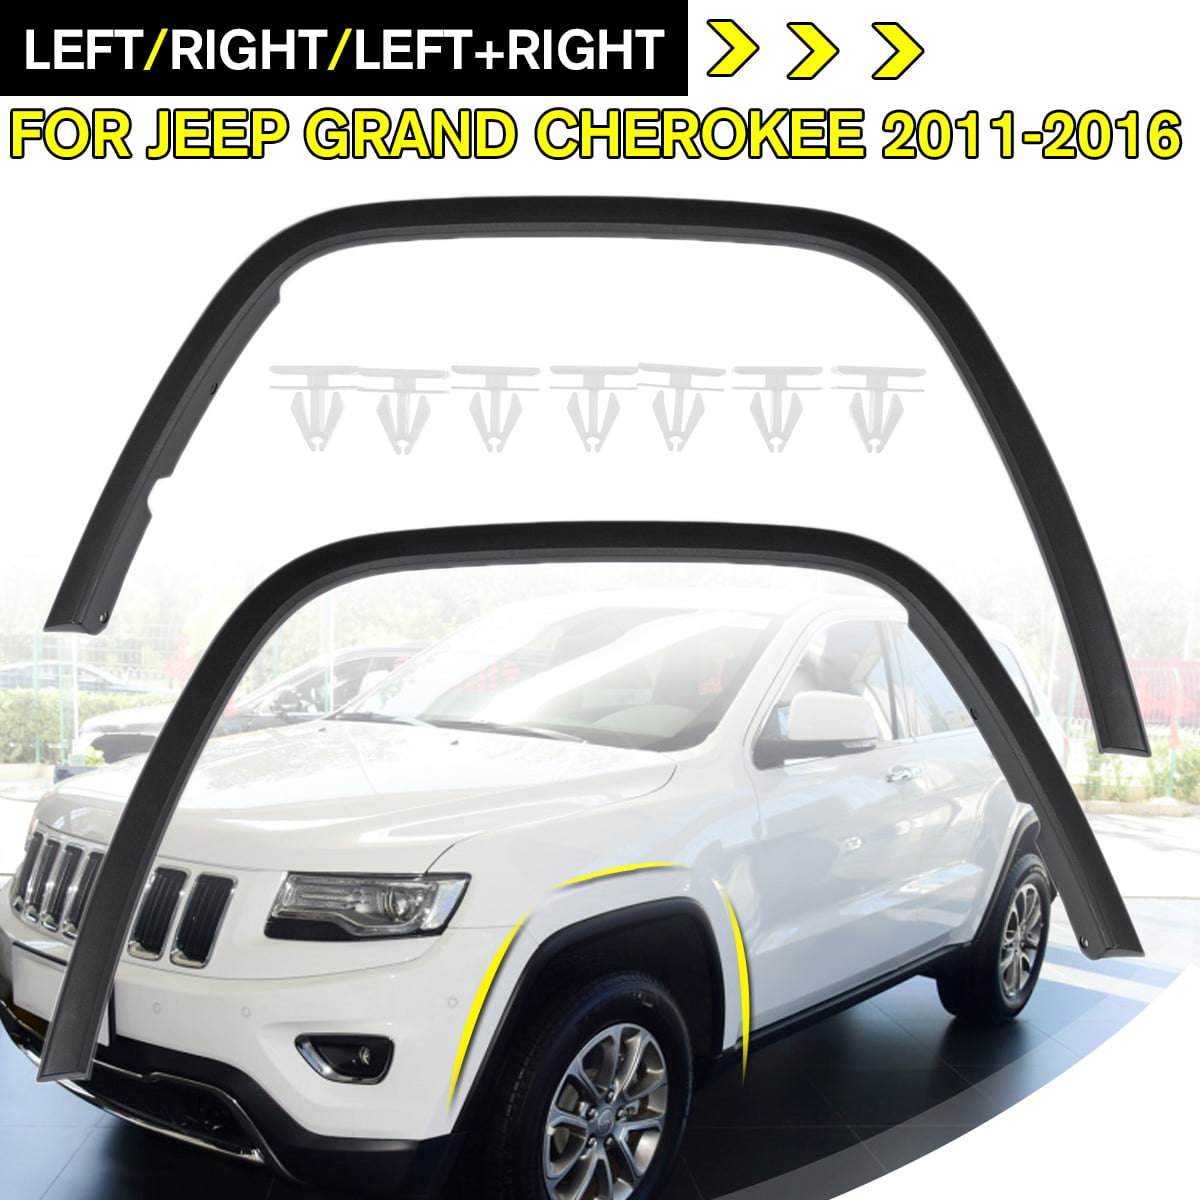 Front Passenger Driver Side Fender Flare For Jeep Grand Cherokee 2011-2016 RH+LH